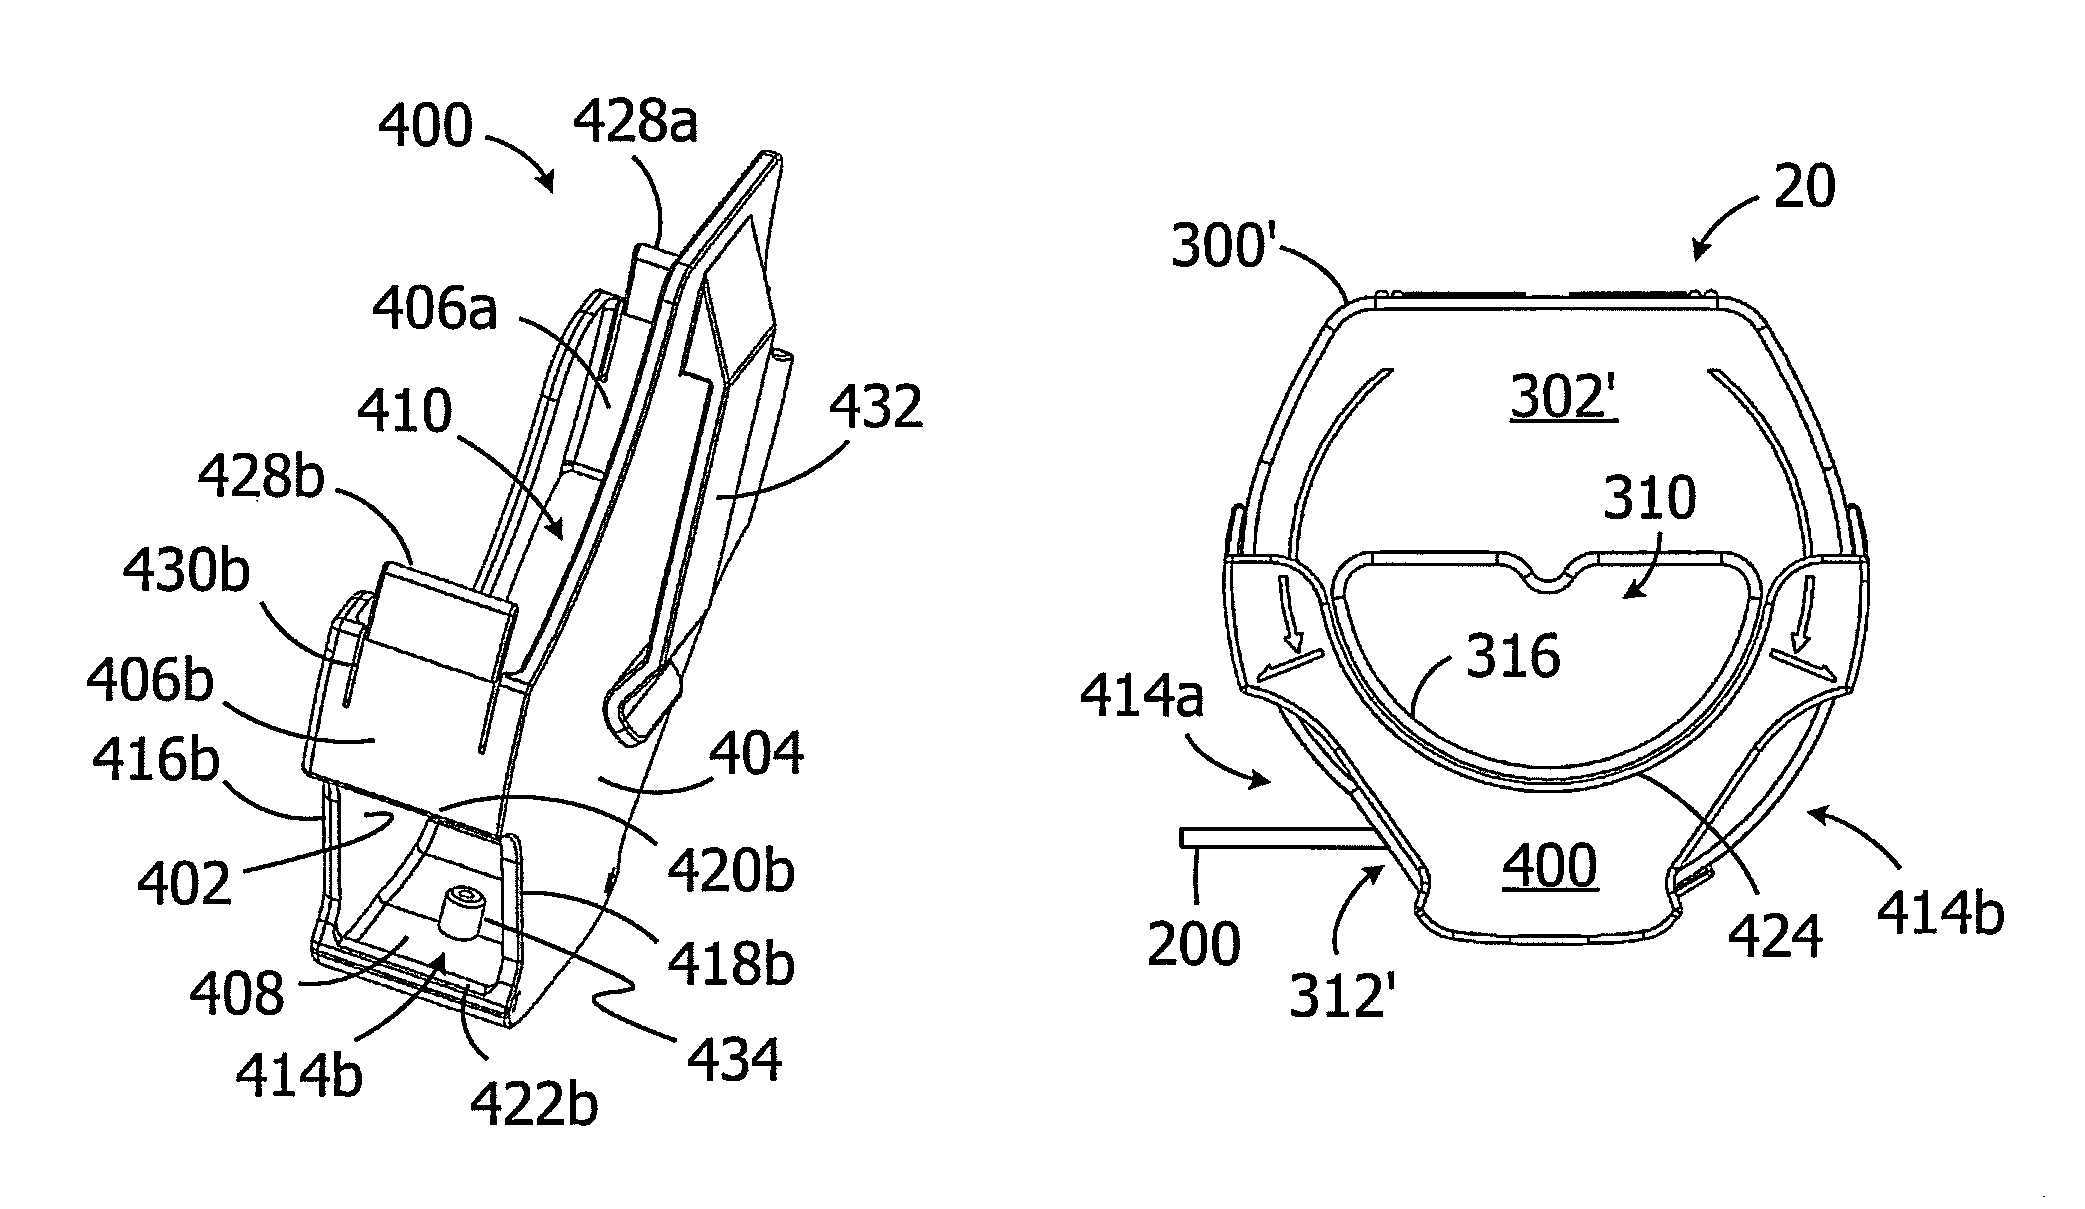 Support strap dispensers and holsters for use with same